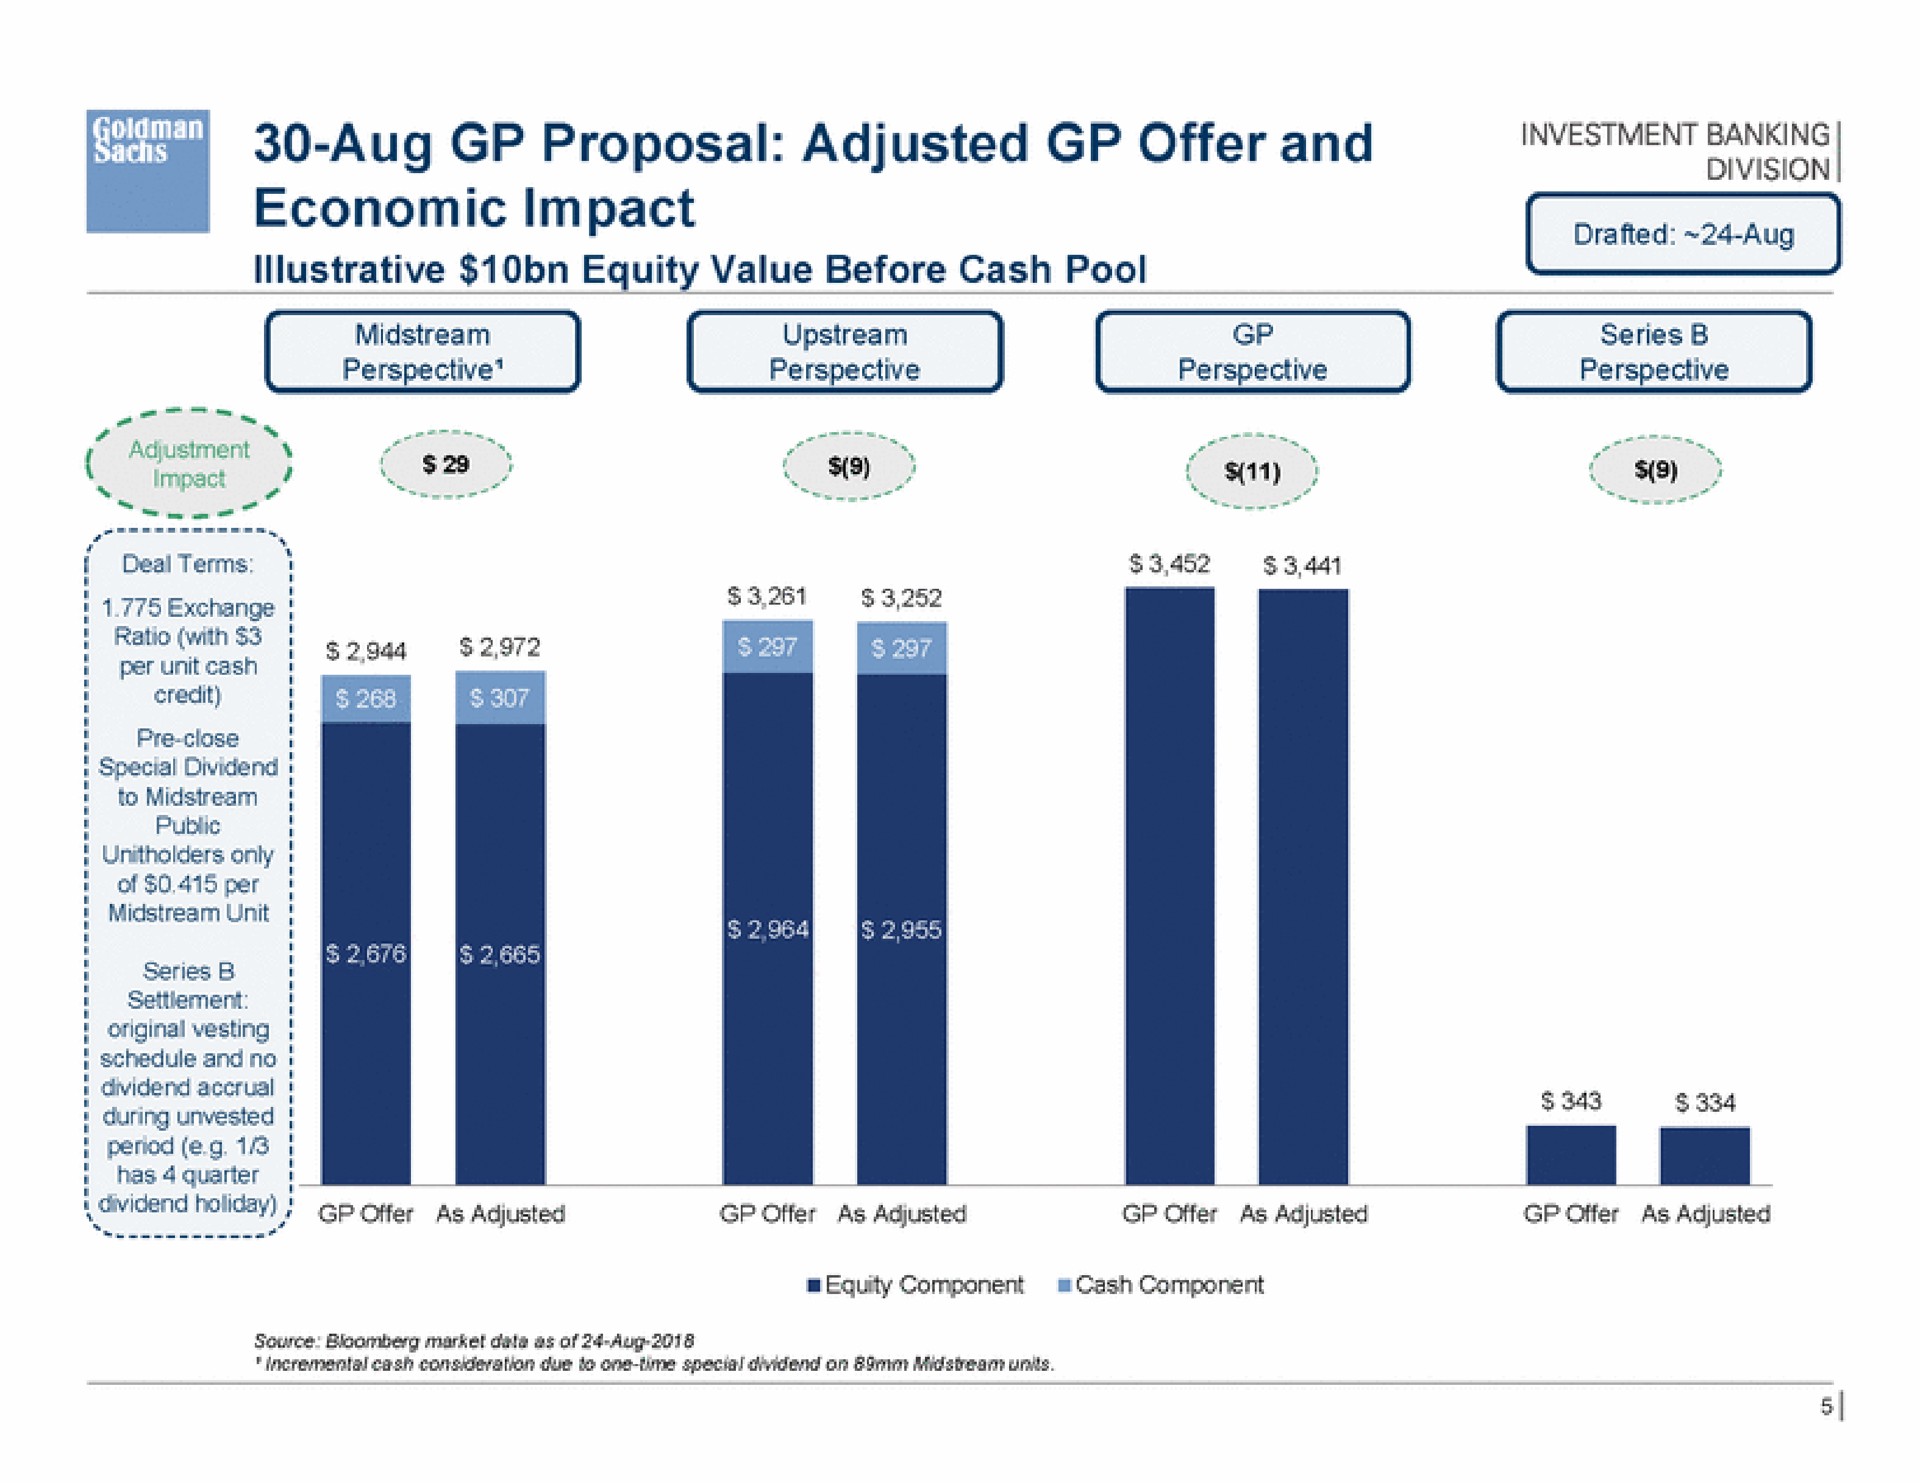 proposal adjusted offer and economic impact | Goldman Sachs